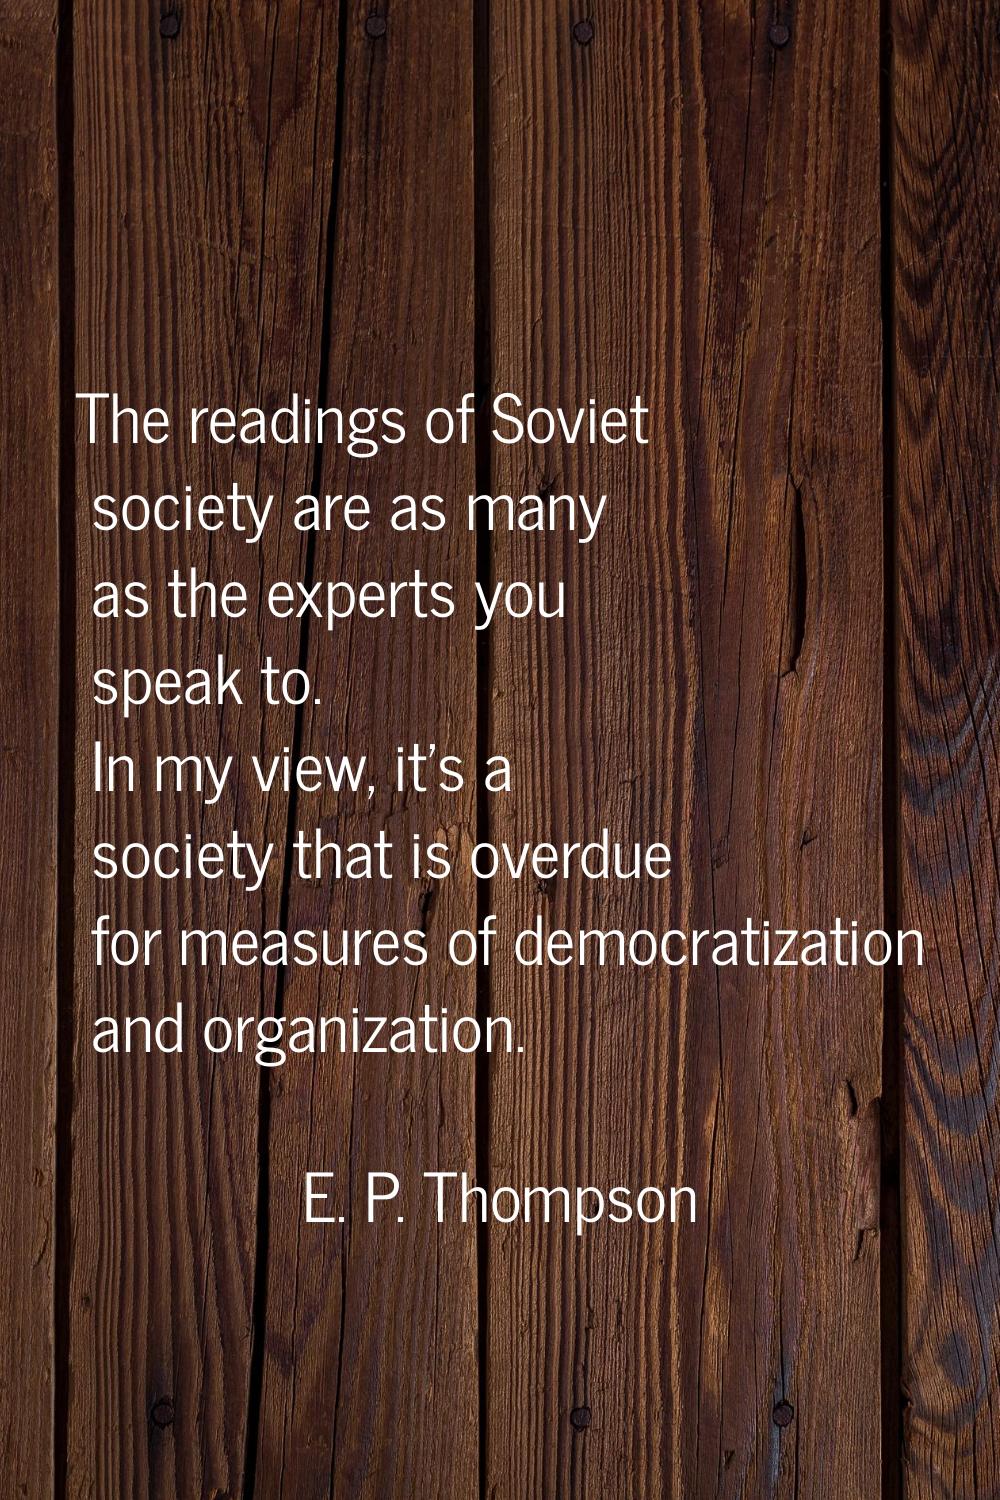 The readings of Soviet society are as many as the experts you speak to. In my view, it's a society 